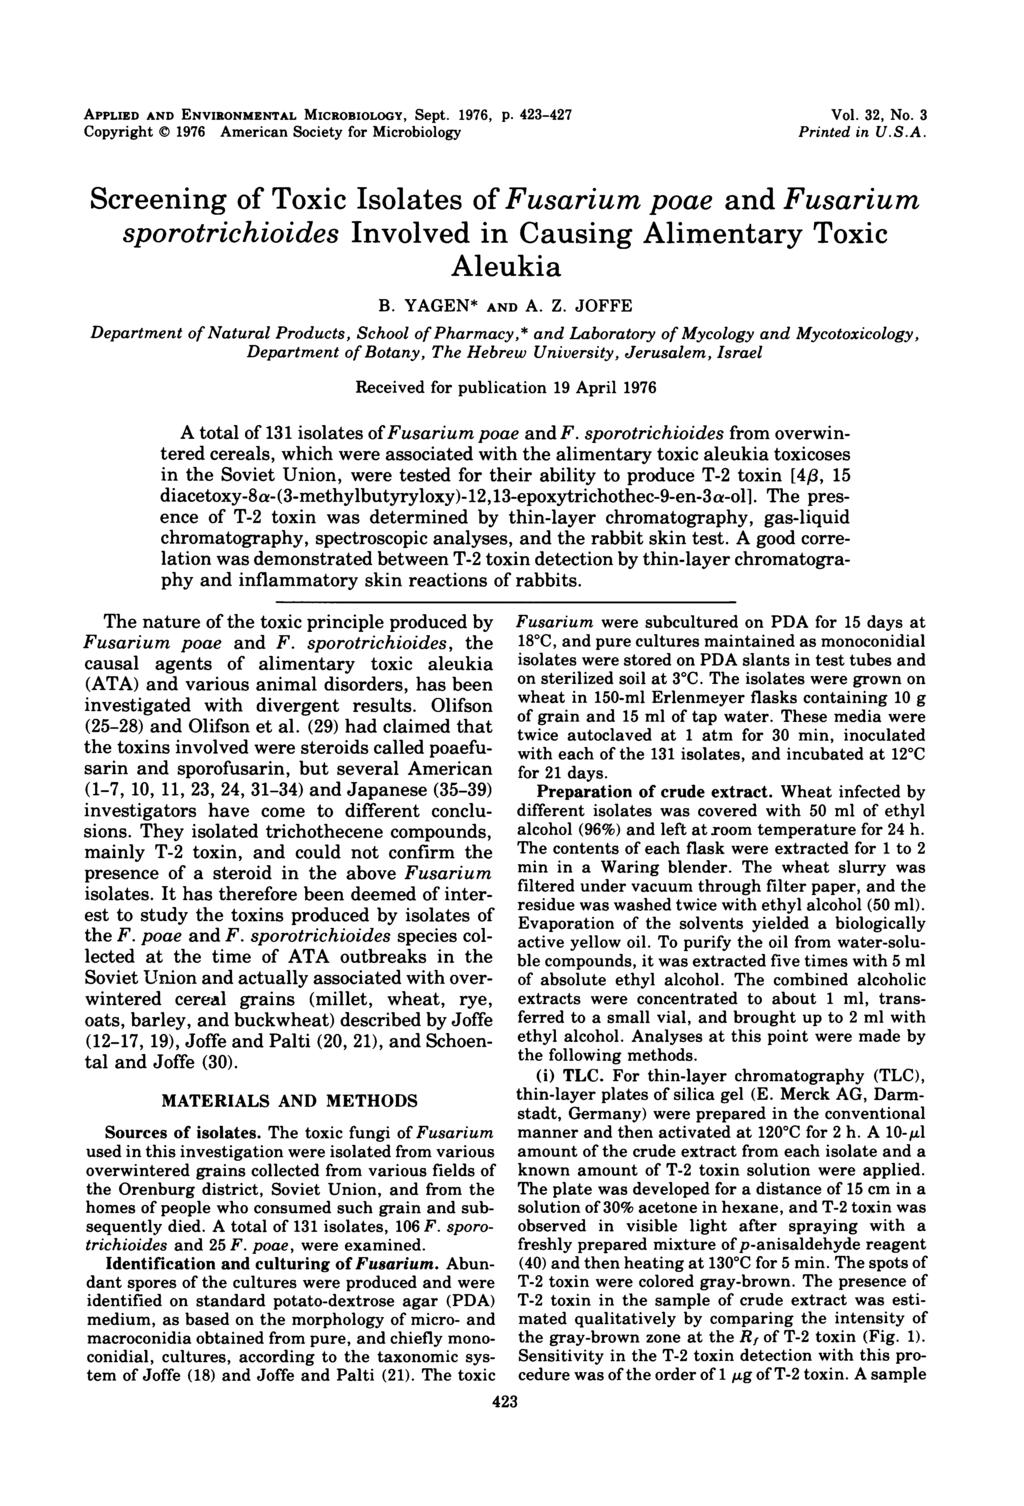 APPLIED AND ENVIRONMENTAL MICROBIOLOGY, Sept. 1976, p. 423-427 Copyright 1976 American Society for Microbiology Vol. 32, No. 3 Printed in U.S.A. Screening of Toxic Isolates of Fusarium poae and Fusarium sporotrichioides Involved in Causing Alimentary Toxic Aleukia B.